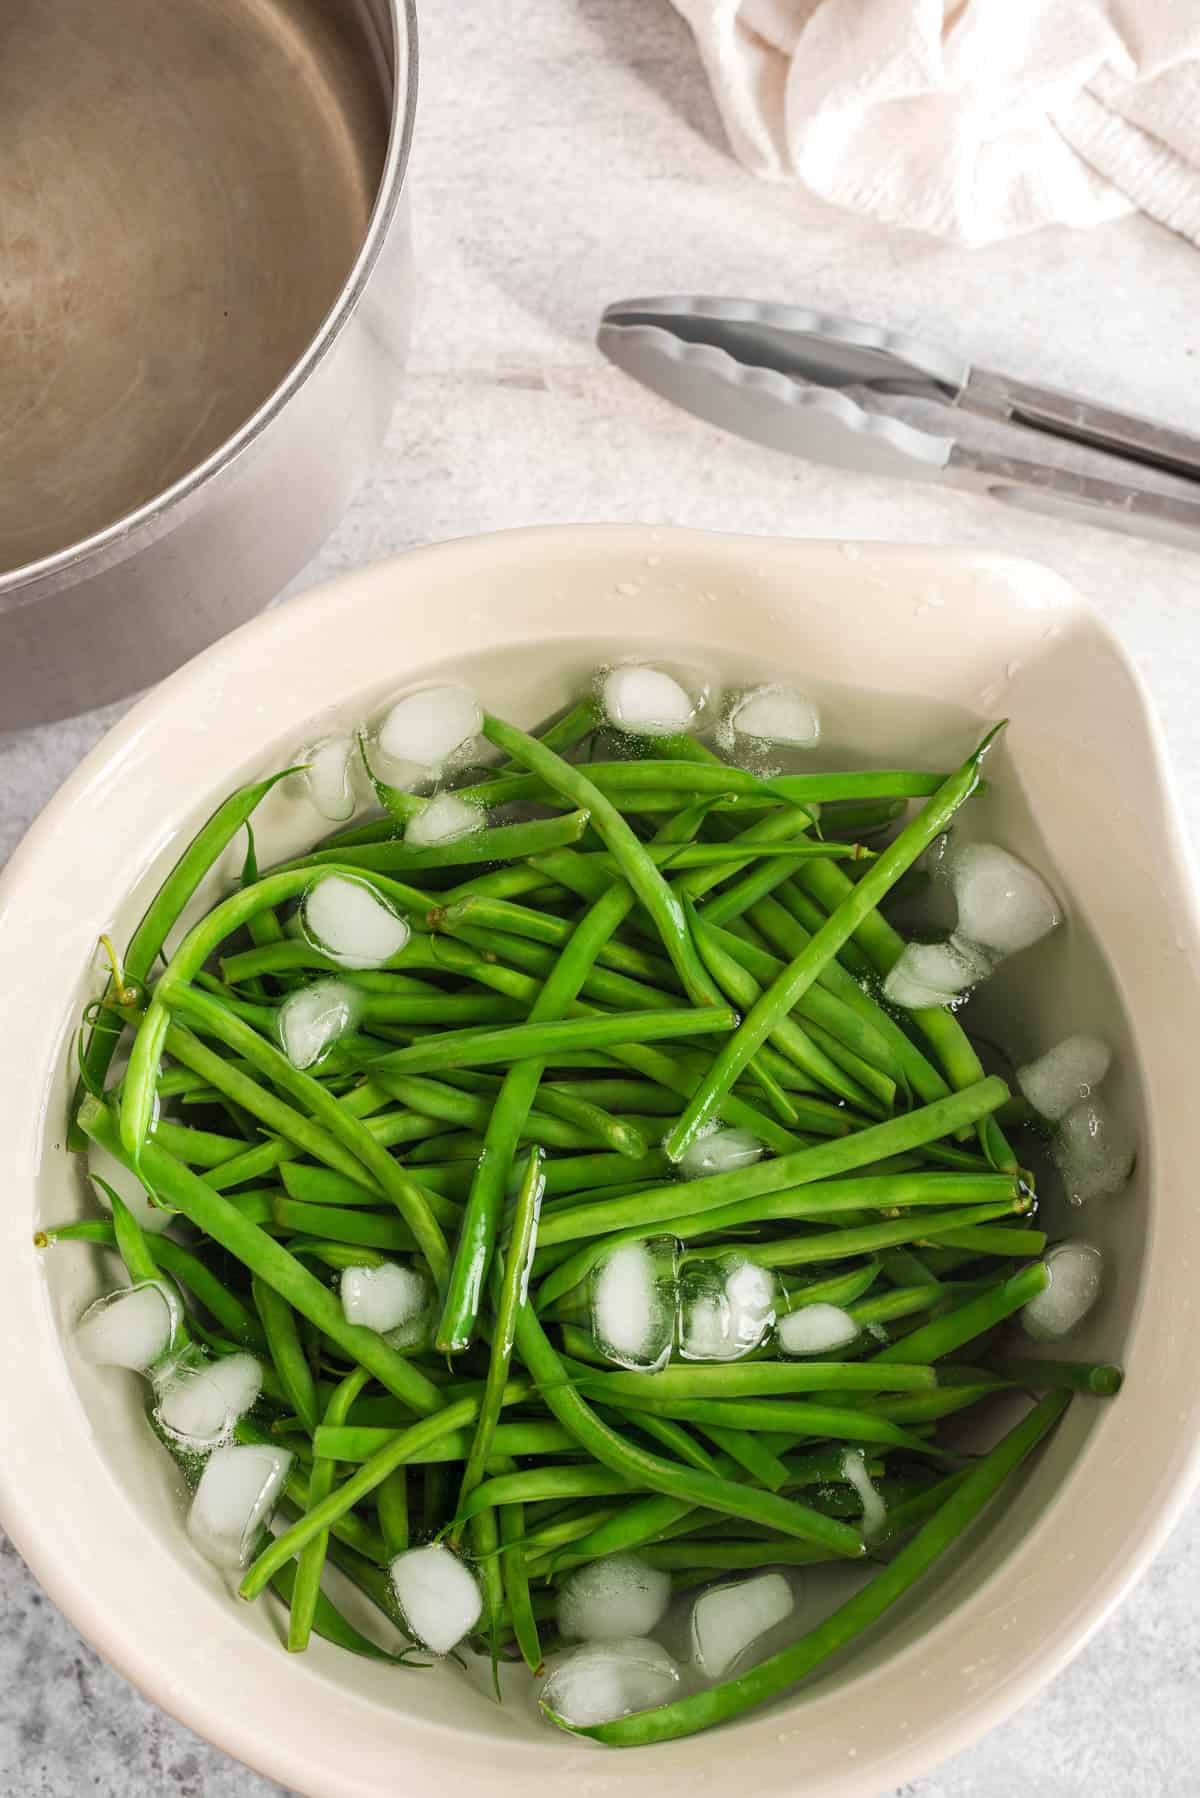 blanche green beans in ice water bath.